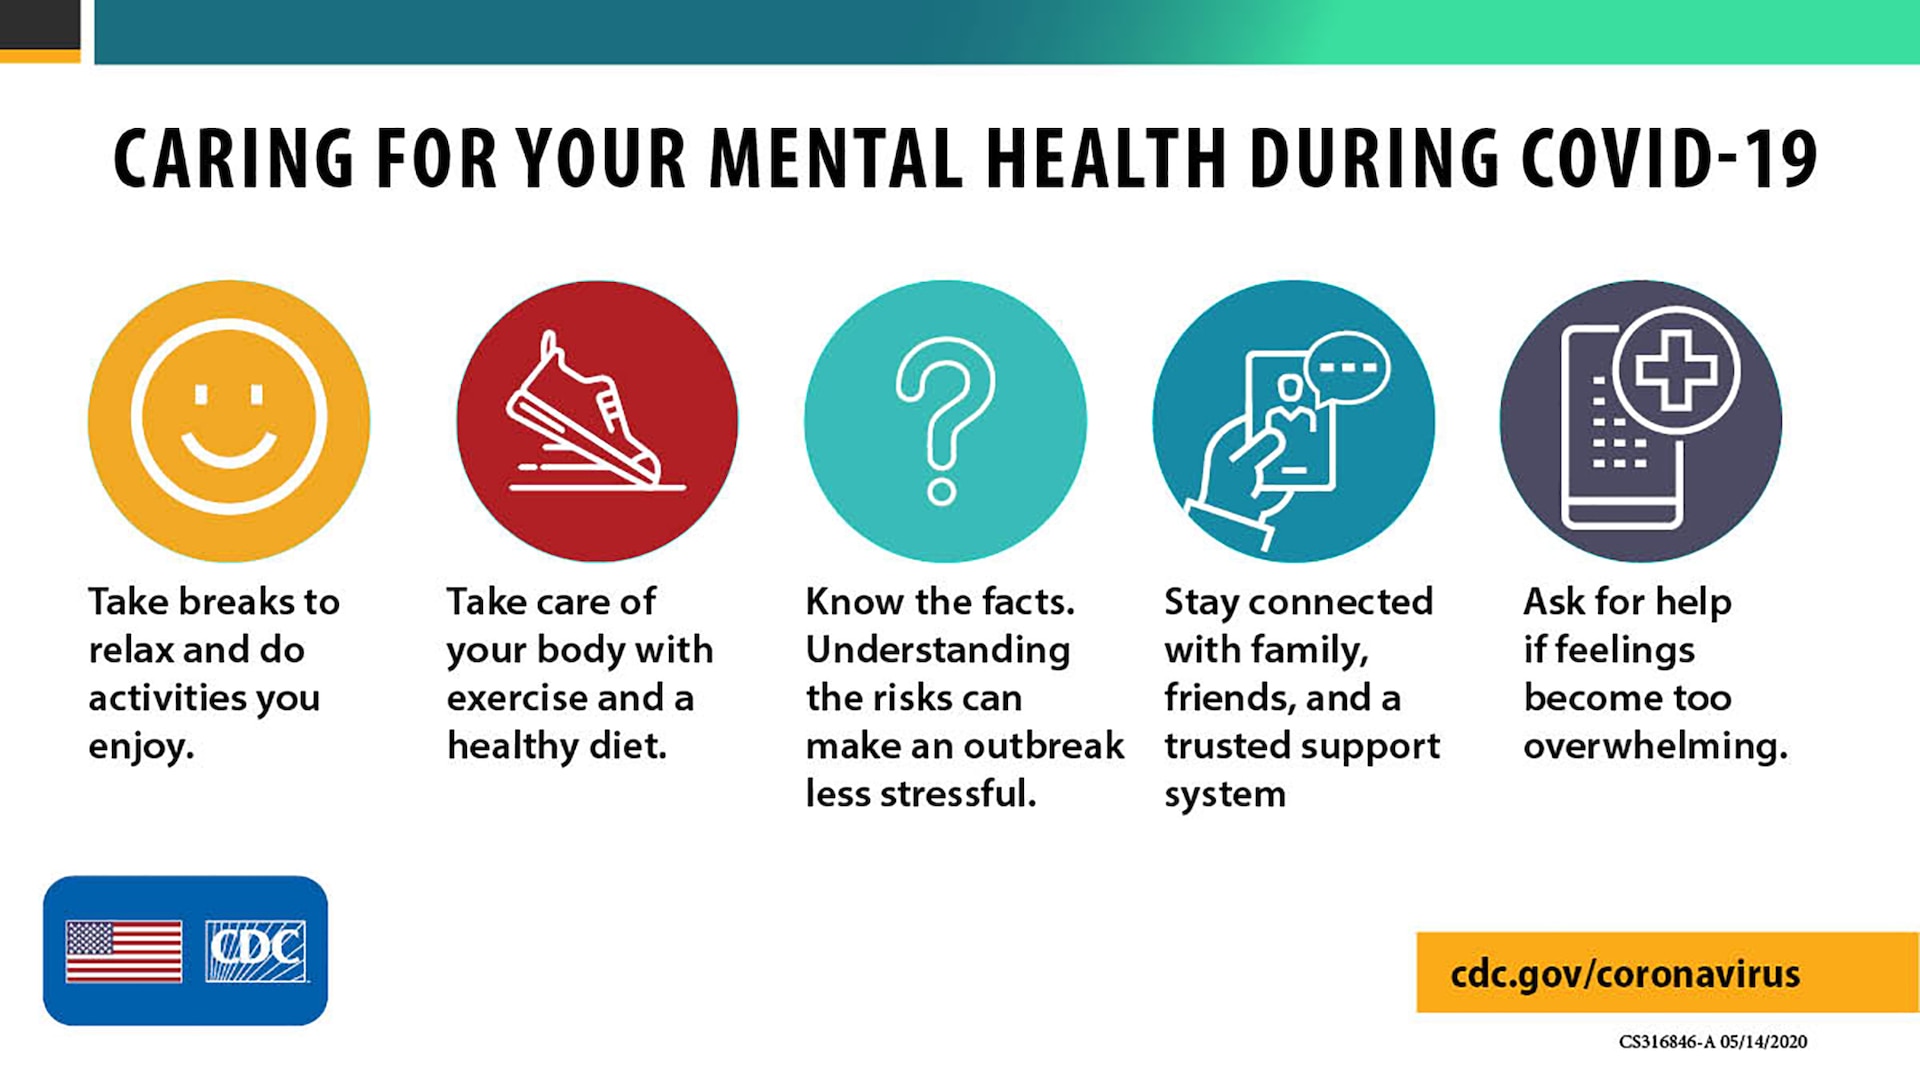 How to Maintain Your Mental Health?